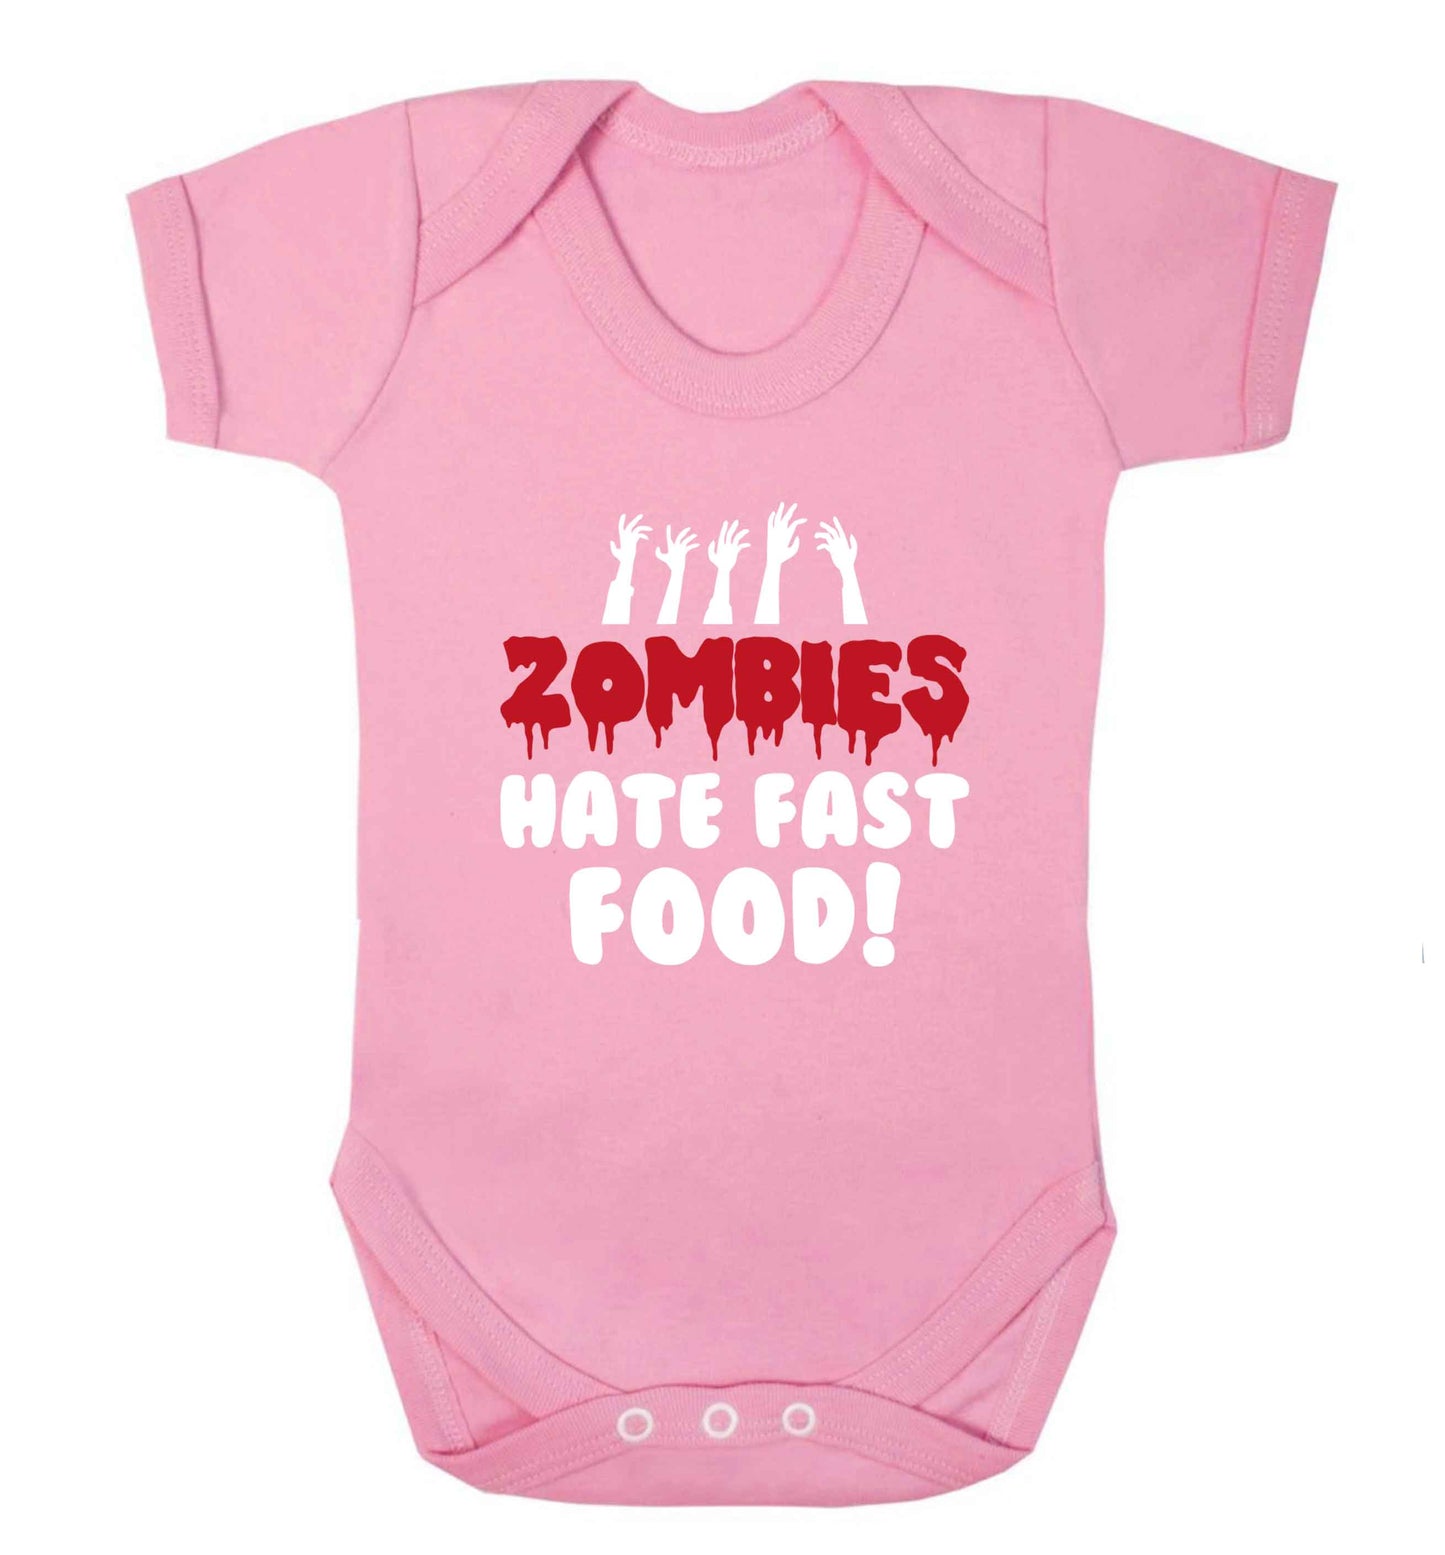 Zombies hate fast food baby vest pale pink 18-24 months